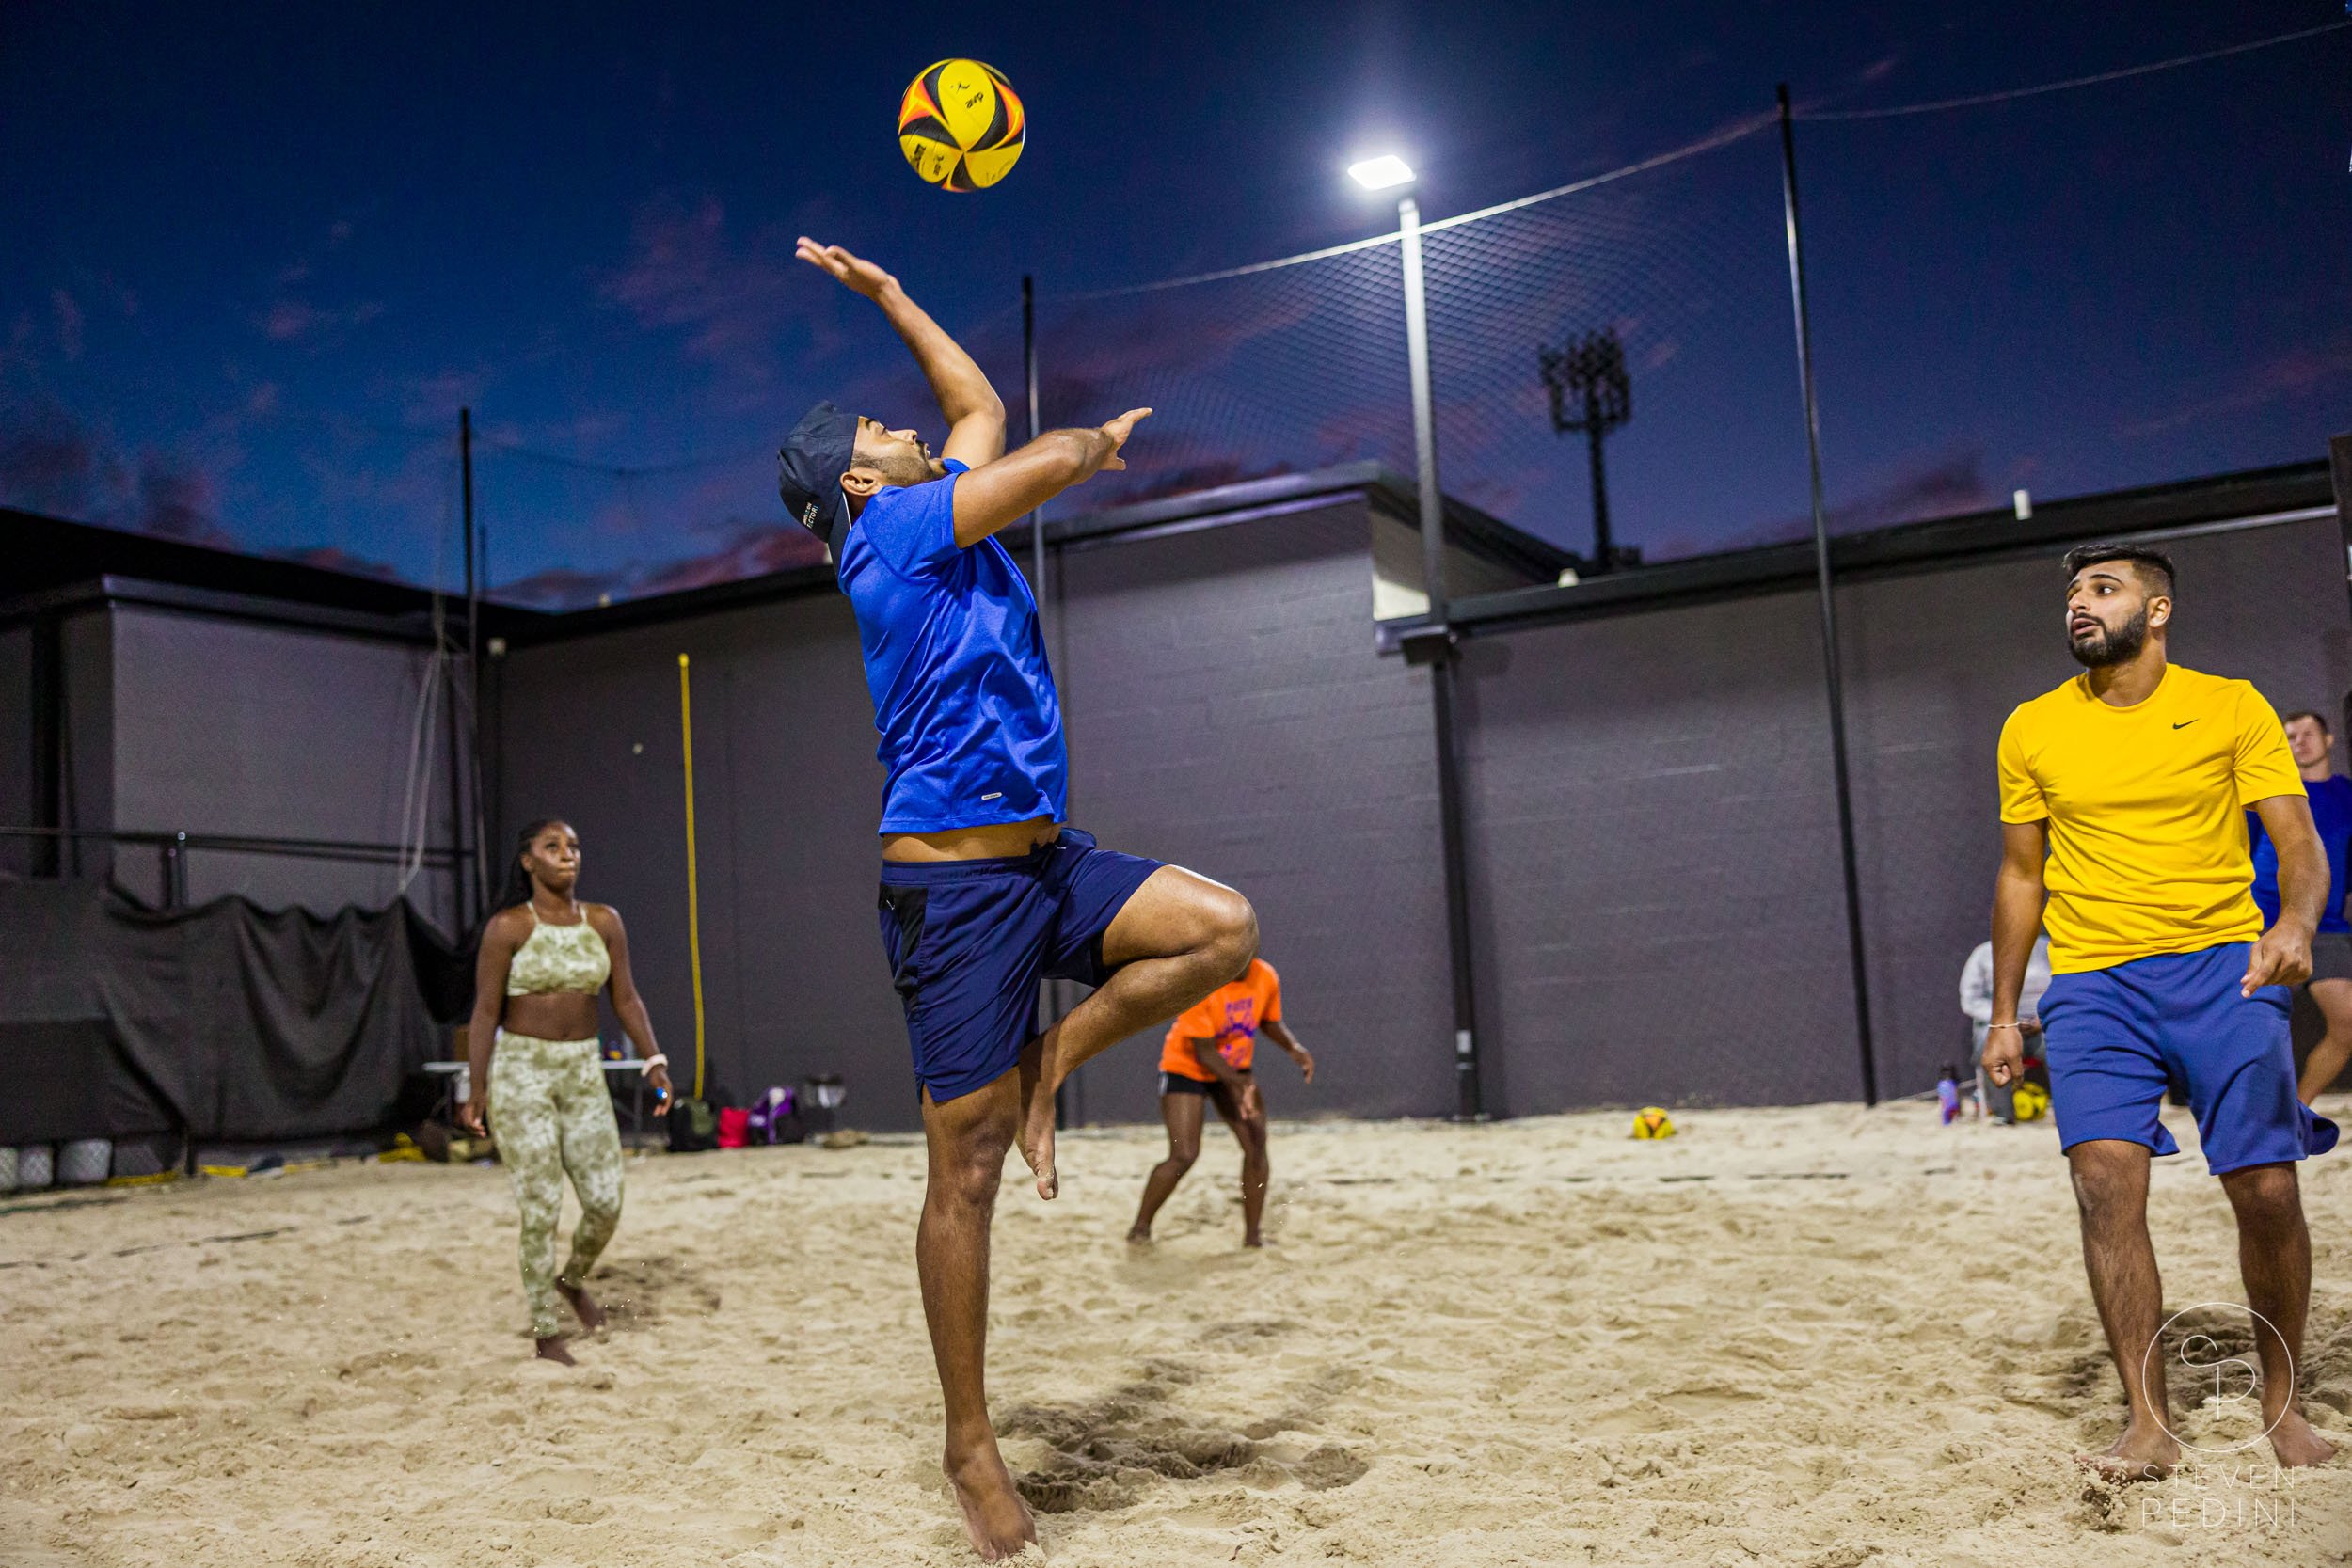 Steven Pedini Photography - Bumpy Pickle - Sand Volleyball - Houston TX - World Cup of Volleyball - 00352.jpg